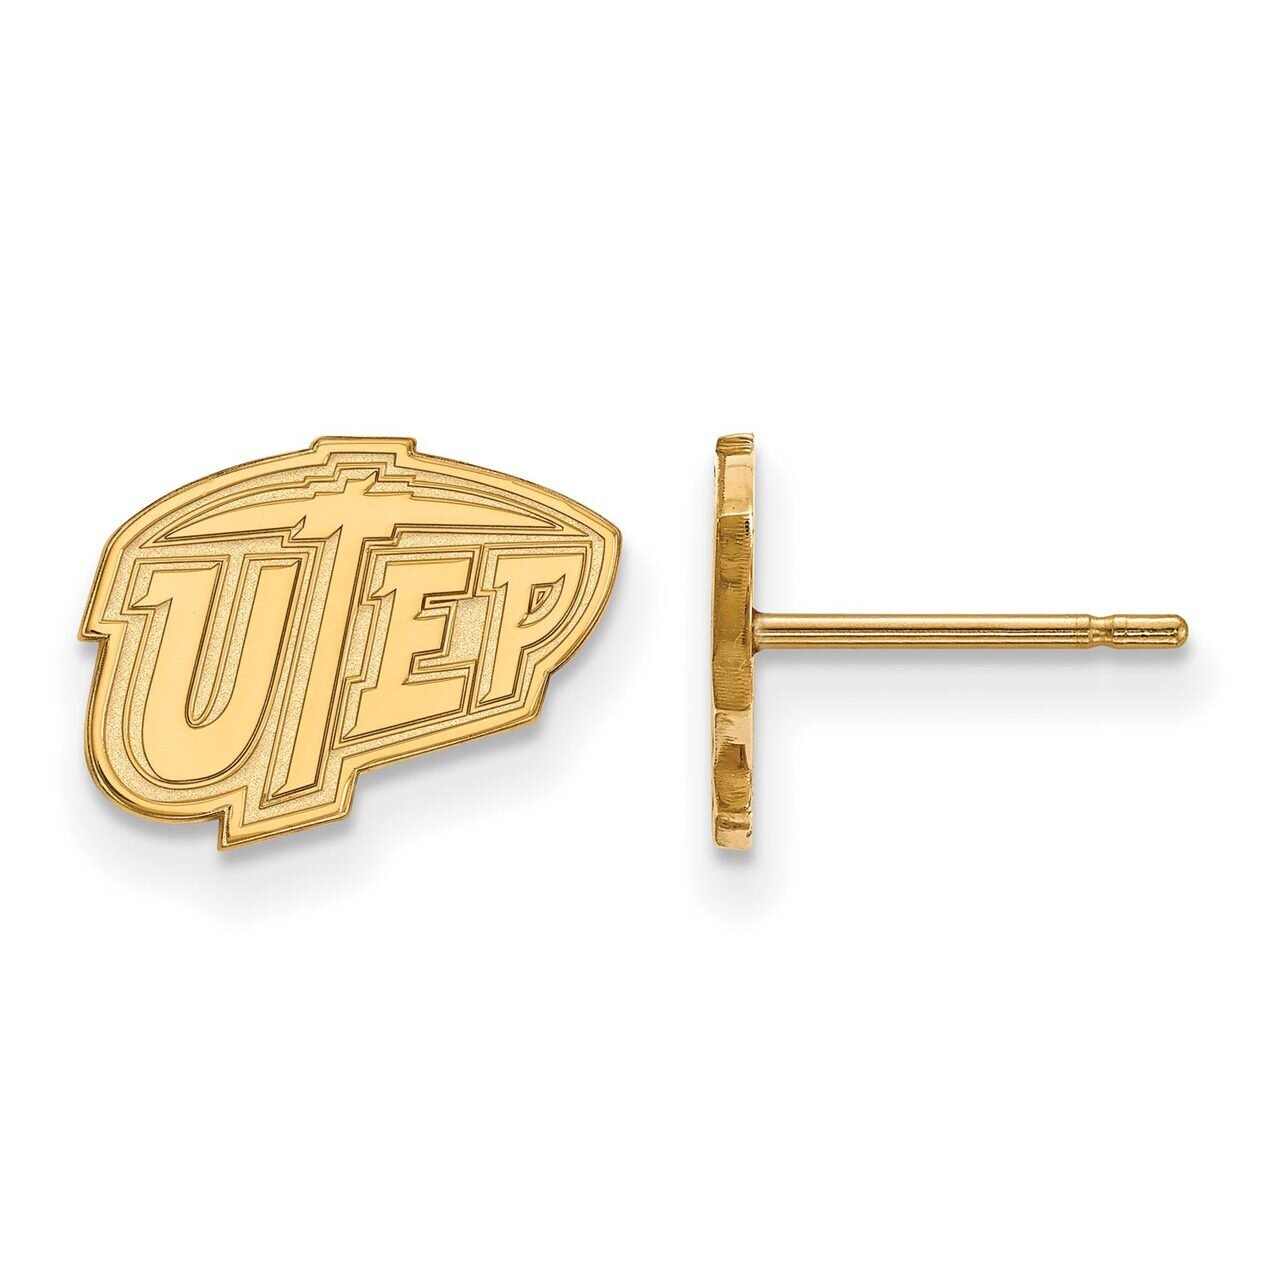 The University of Texas at El Paso x-Small Post Earring Gold-plated Silver GP007UTE